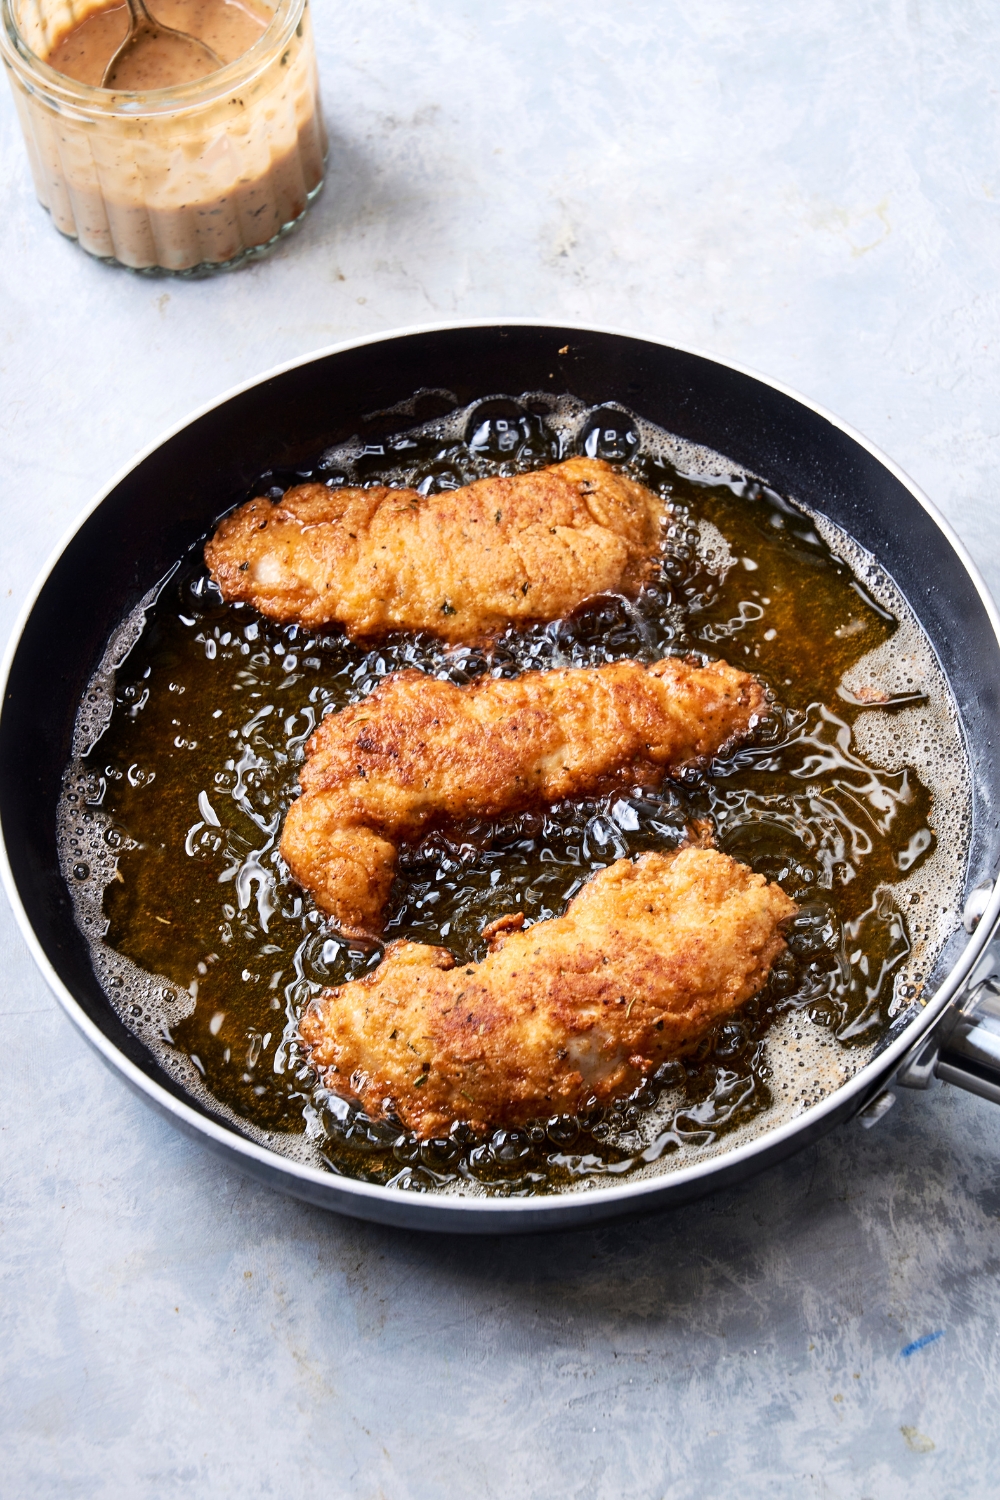 A frying pan with hot oil cooking the coated golden brown chicken tenders.